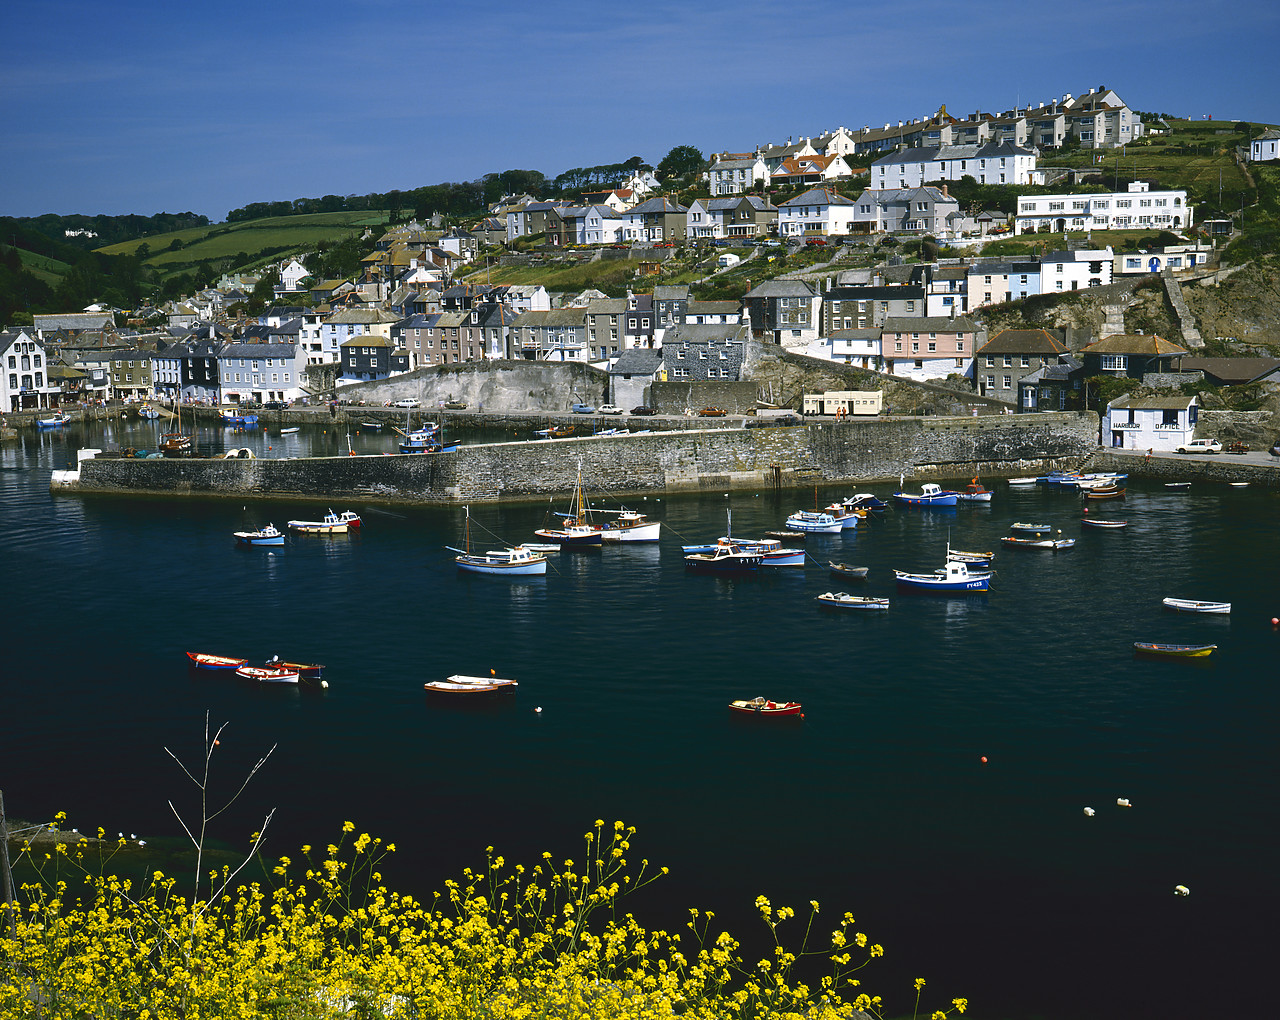 #85390-1 - Mevagissey Harbour, Cornwall, England